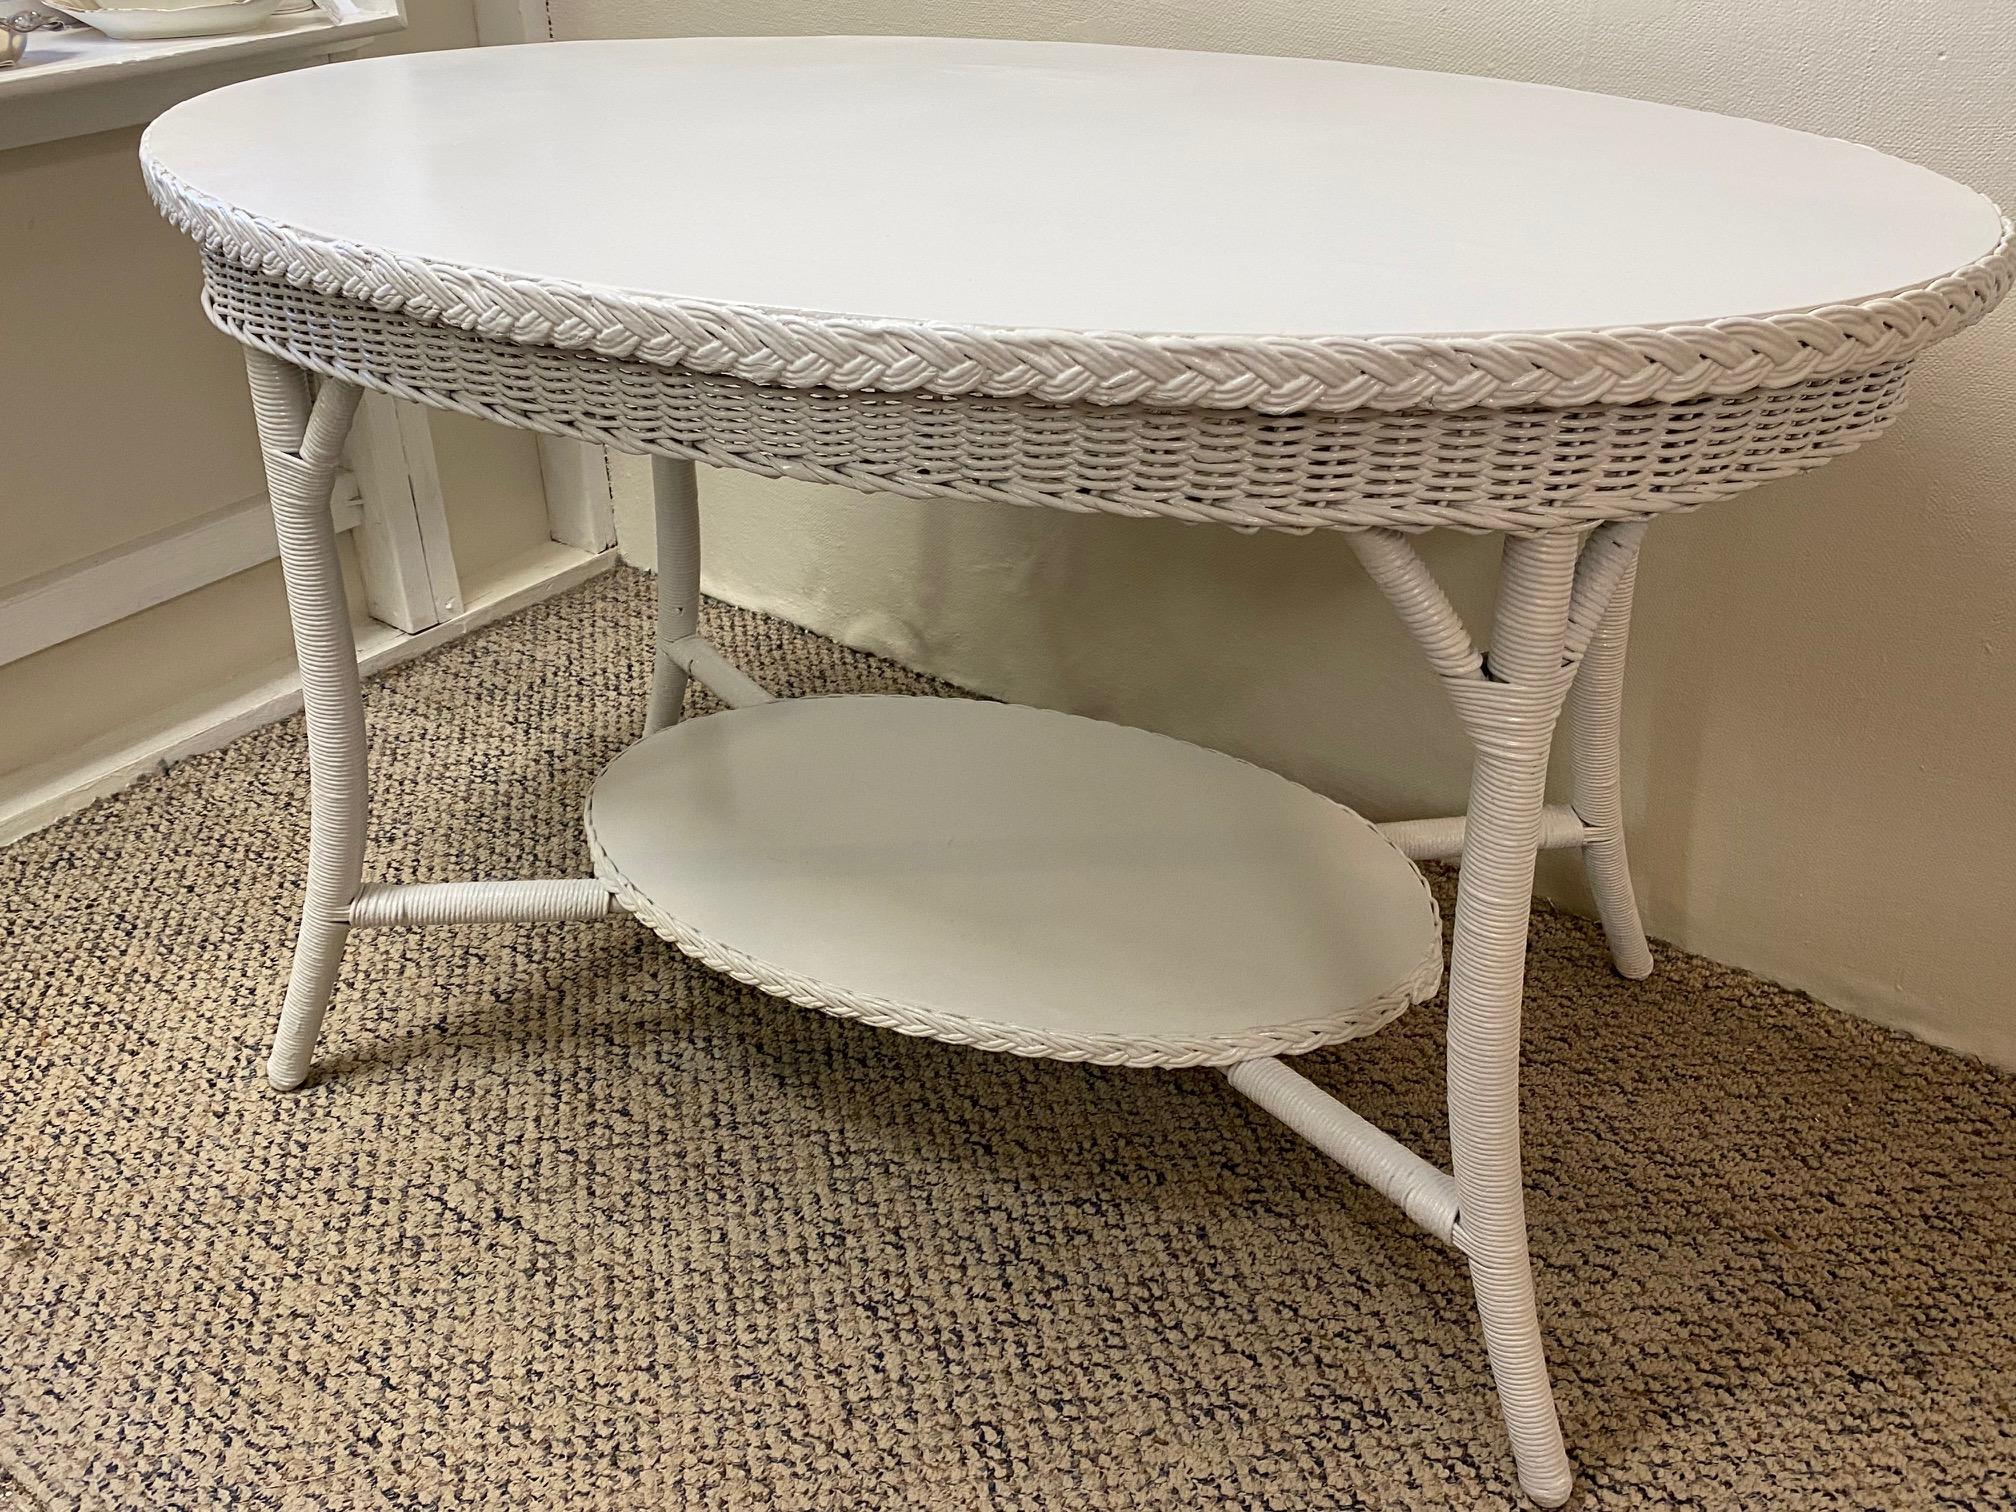 Vintage American Wicker Company Freshly White Painted Oval Dining Table For Sale 1